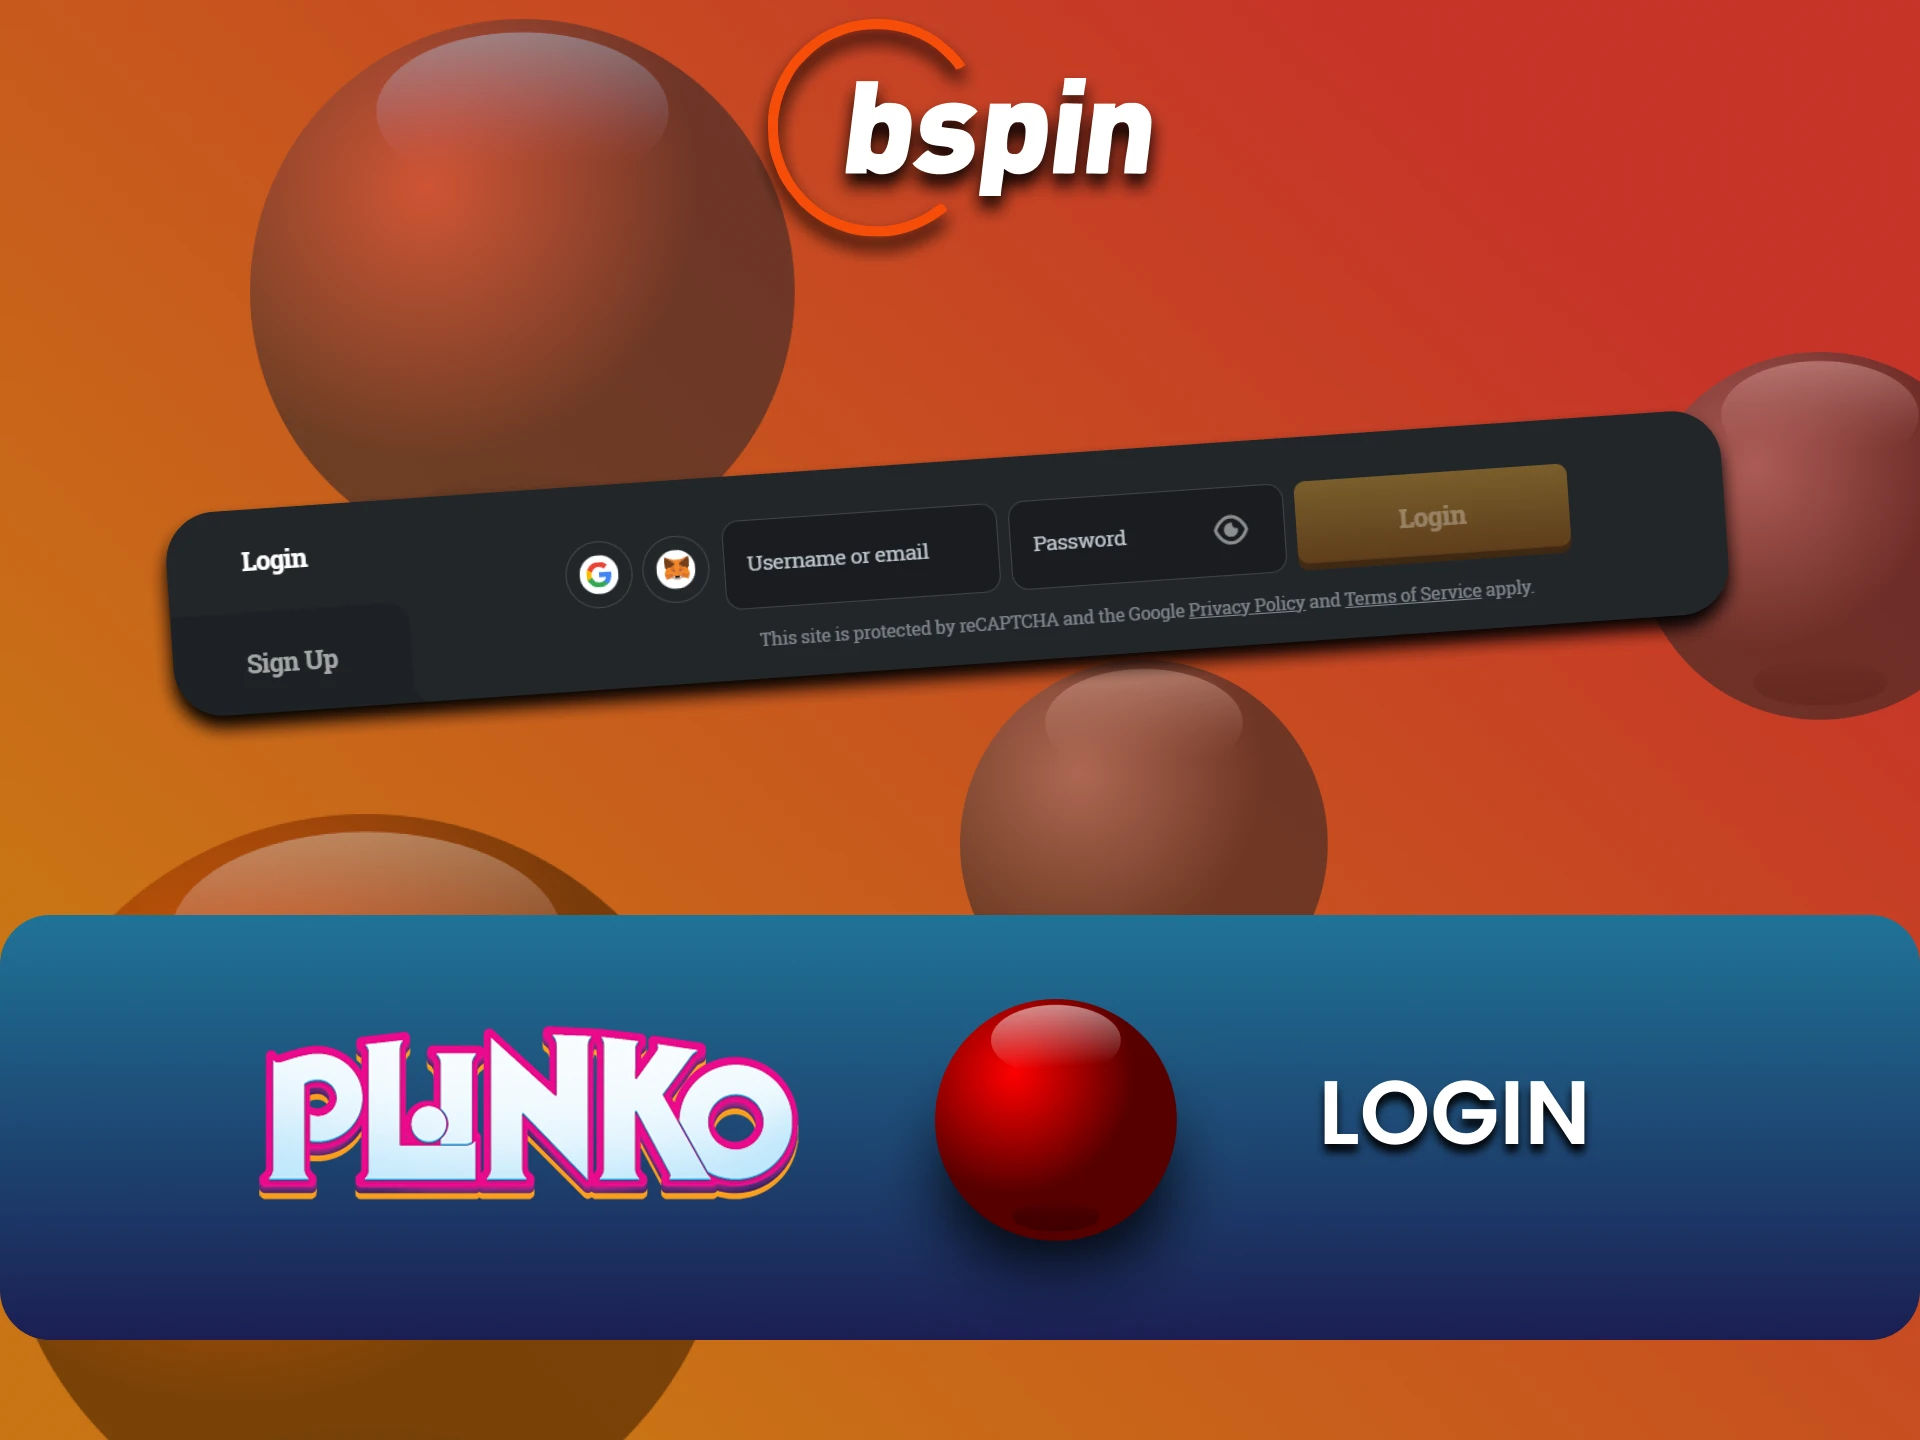 By logging into your Bspin account you can play Plinko.